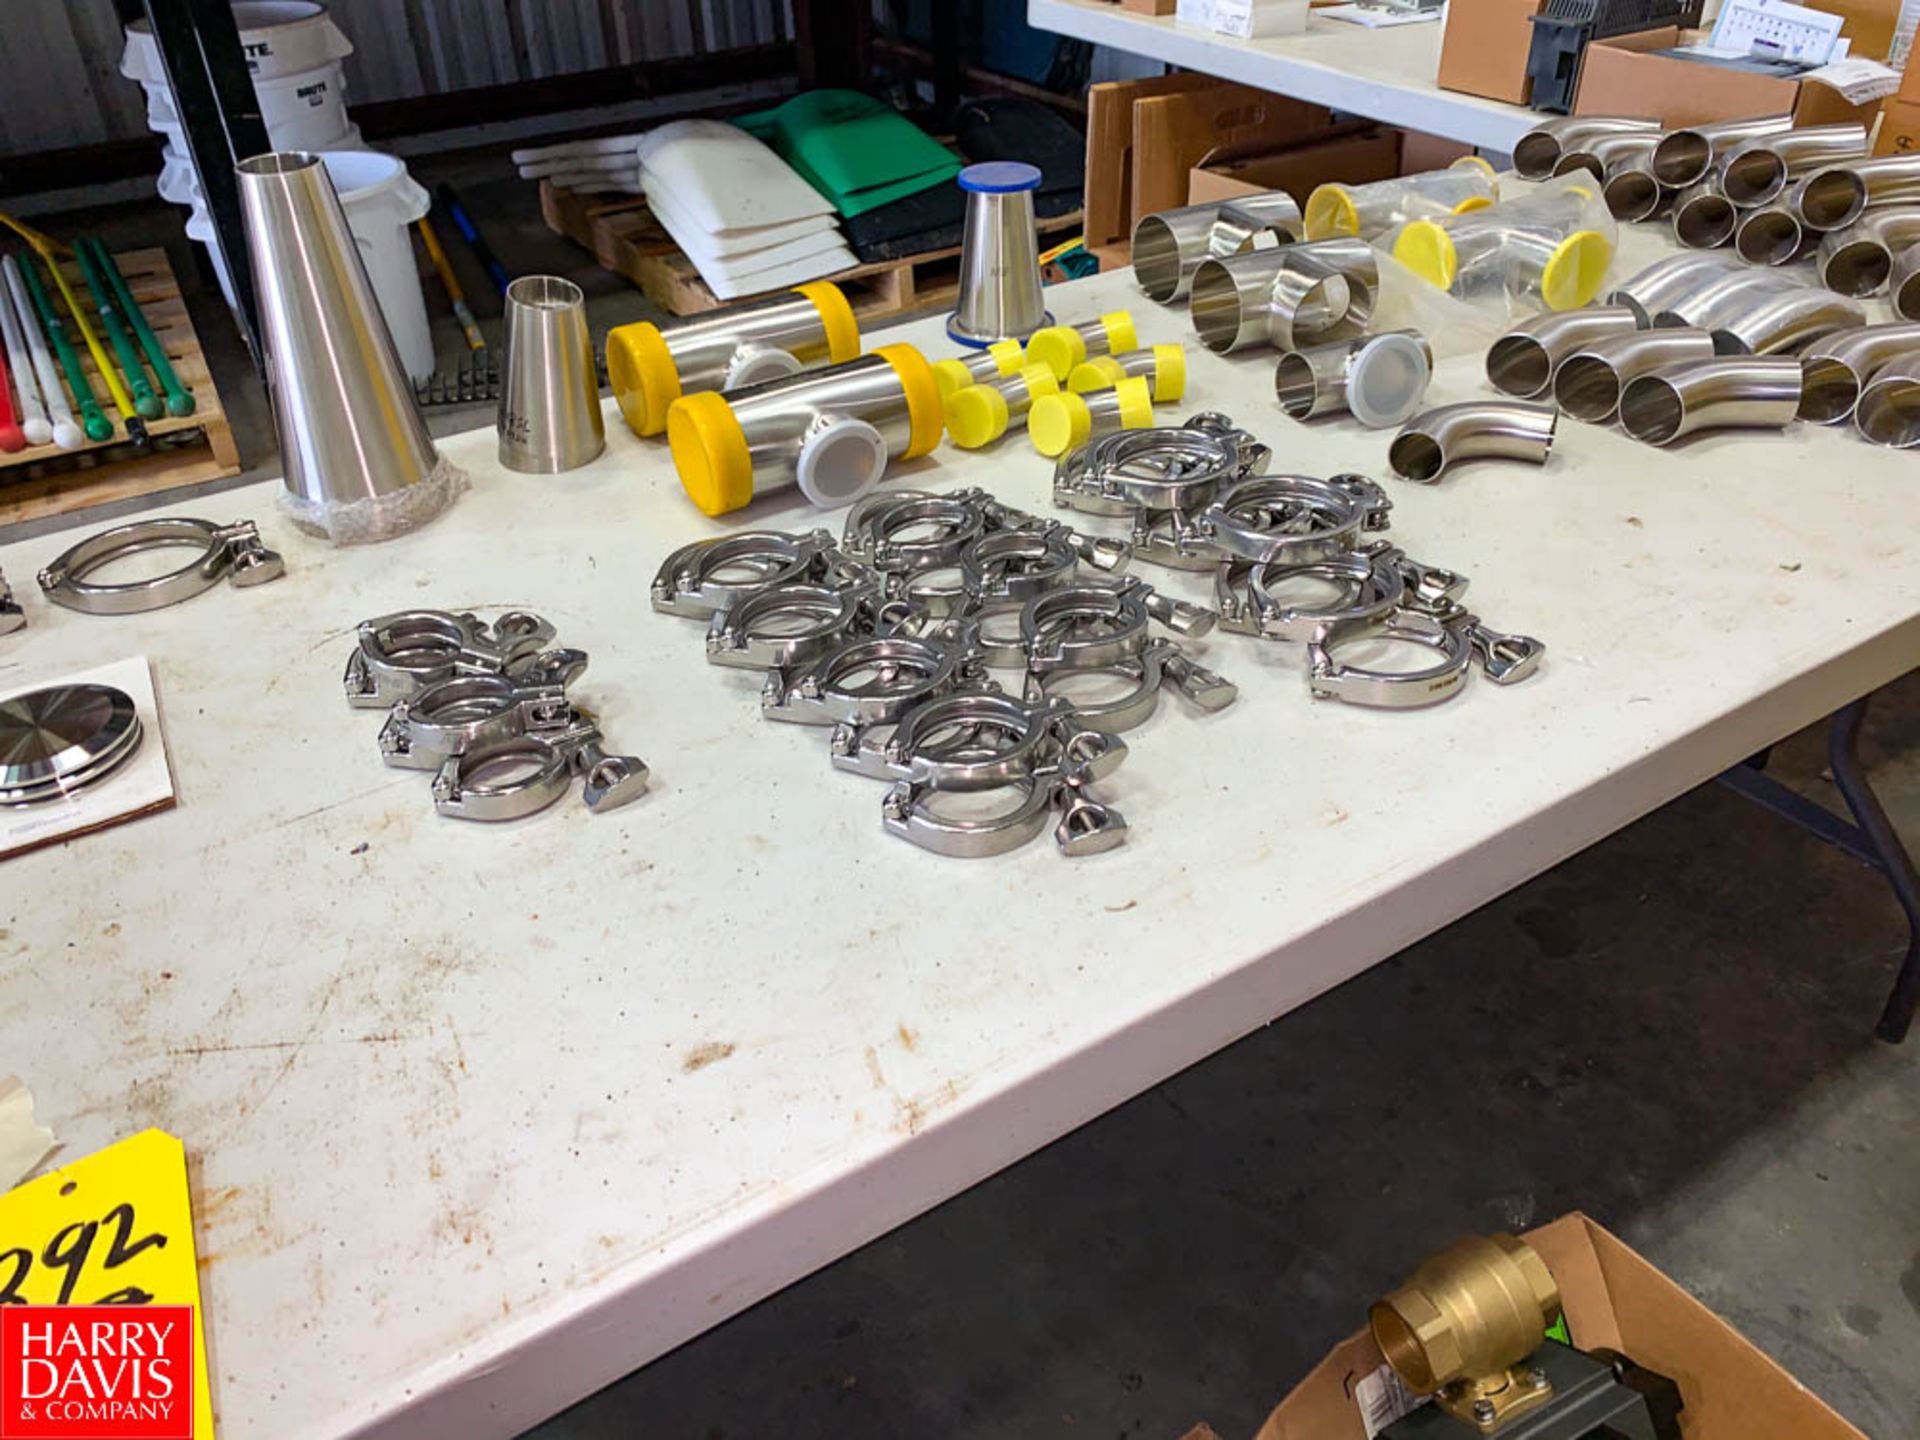 NEW (50+) S/S Clamps, Caps, Reducers, and Tees, Up To 3" **Table Not Included Rigging Fee: $ 50